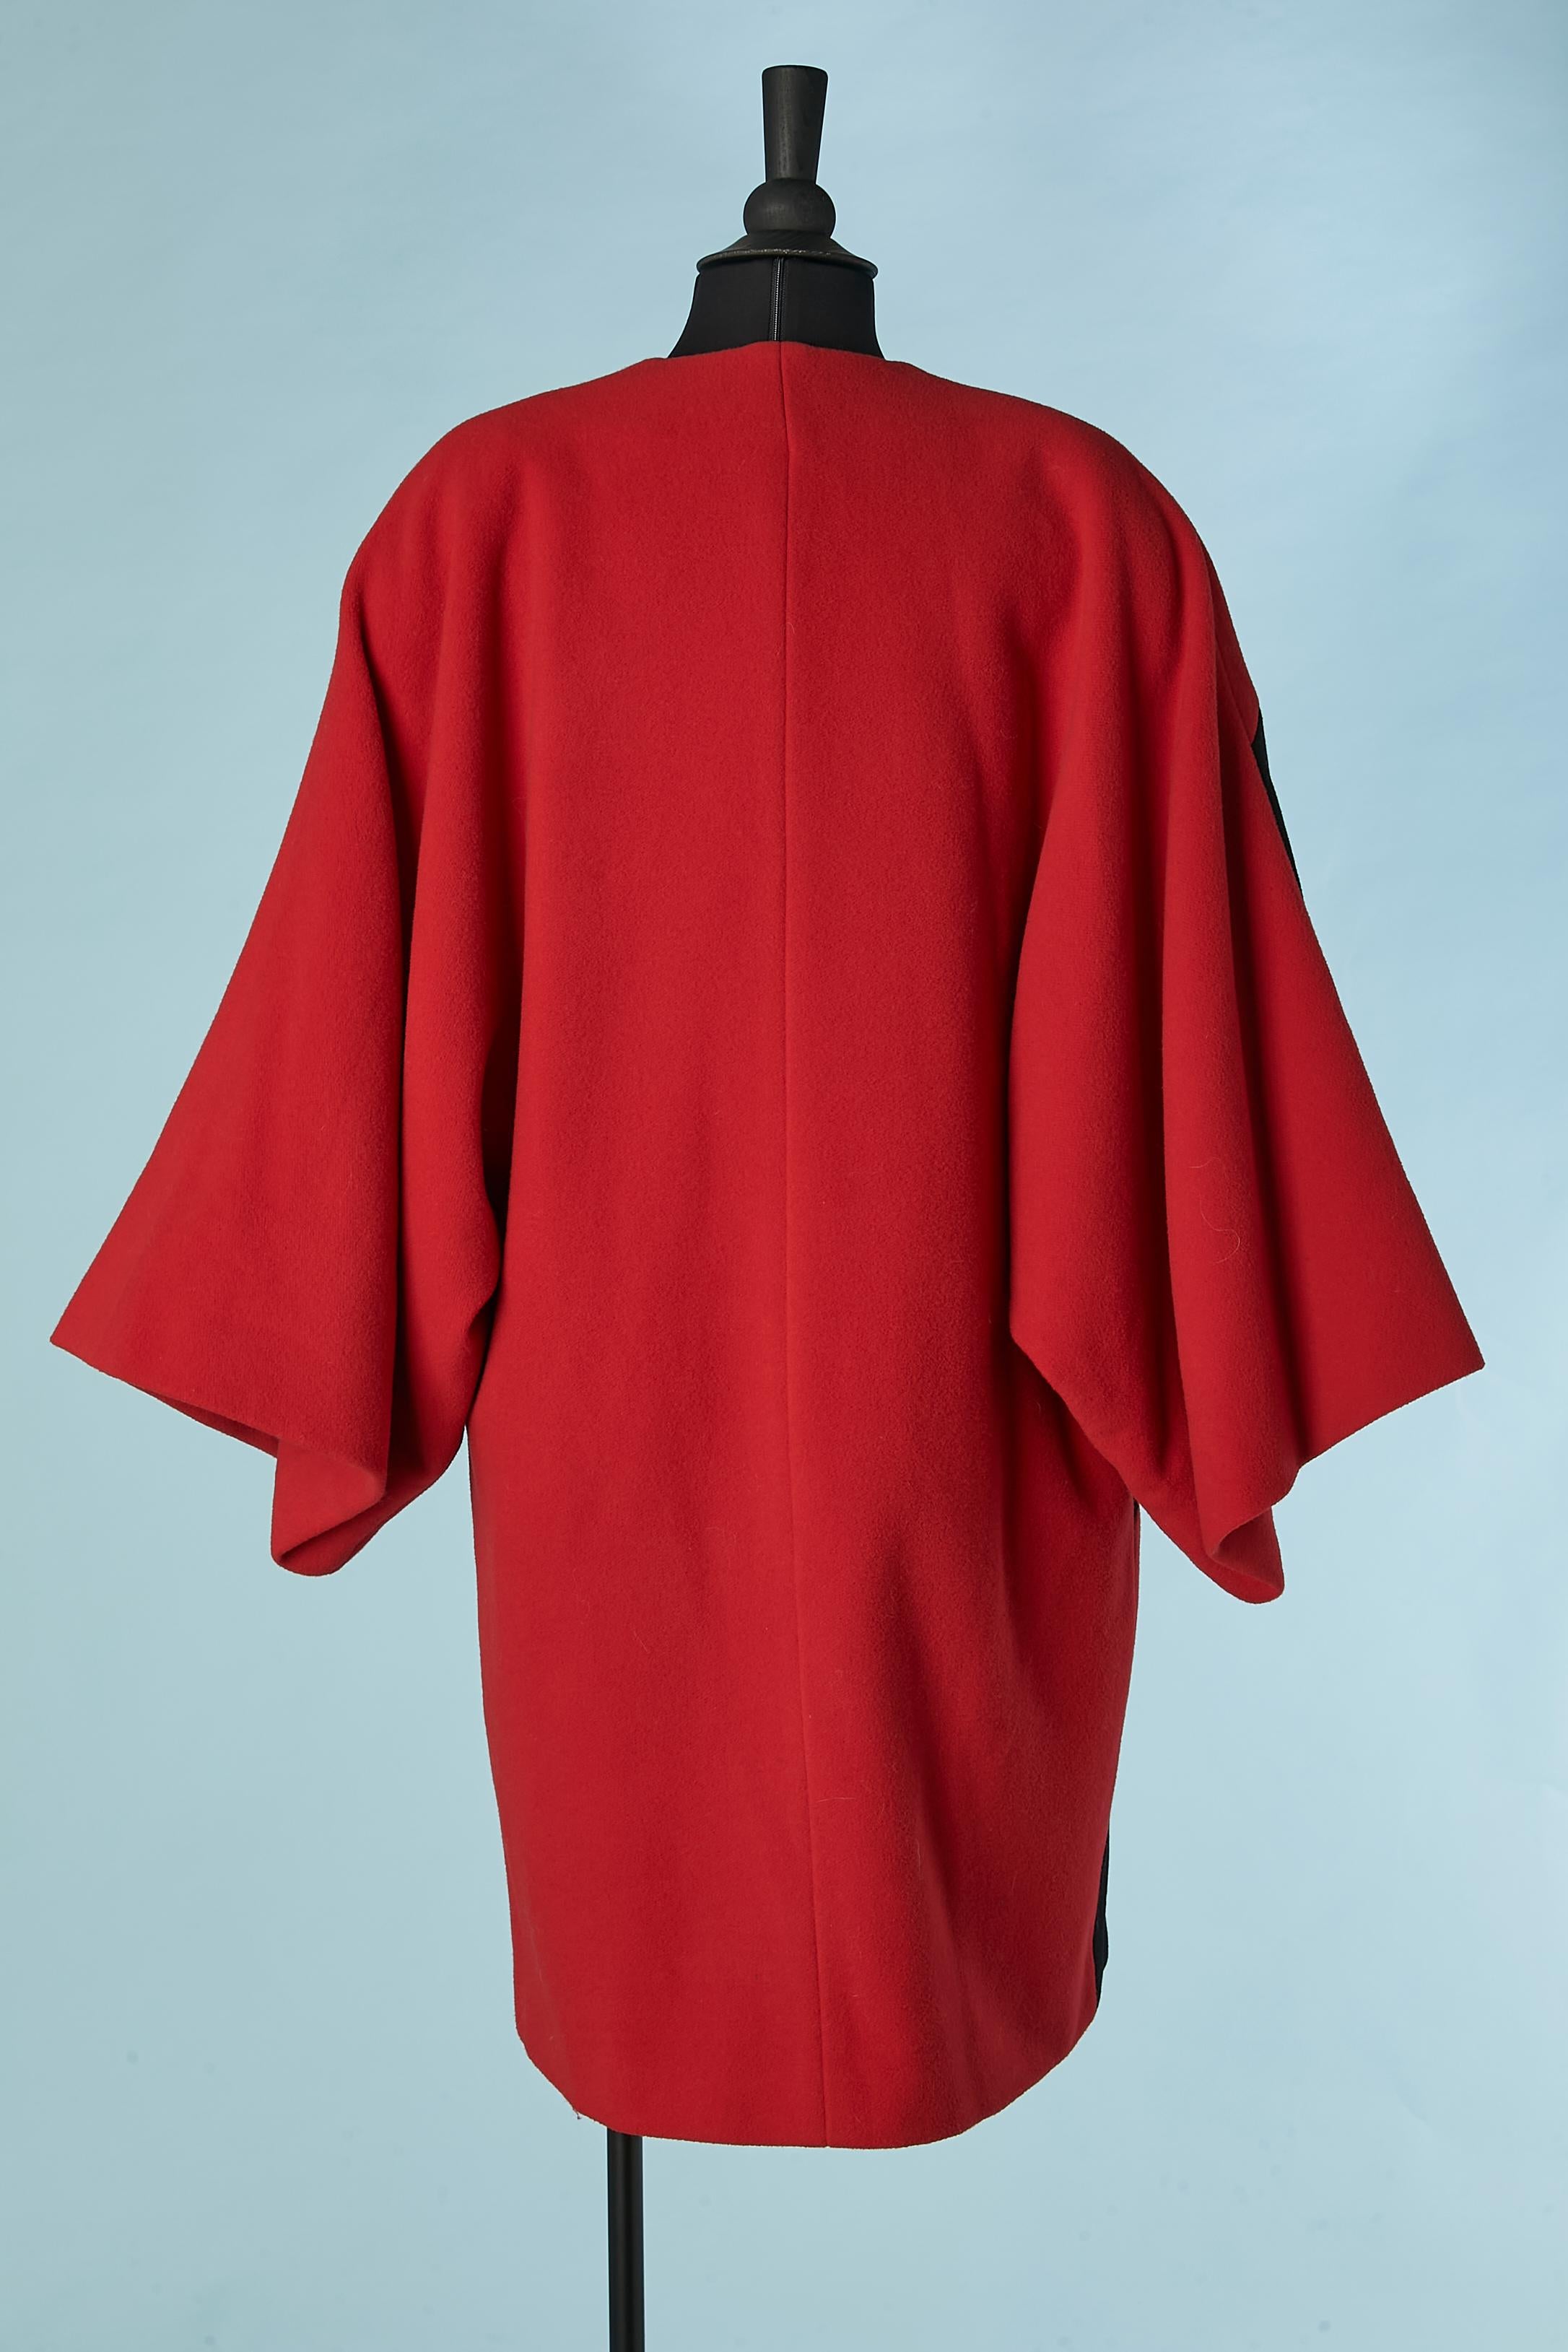 Red and black wool & cashmere double-breasted coat Pierre Cardin Circa 1970's  For Sale 1